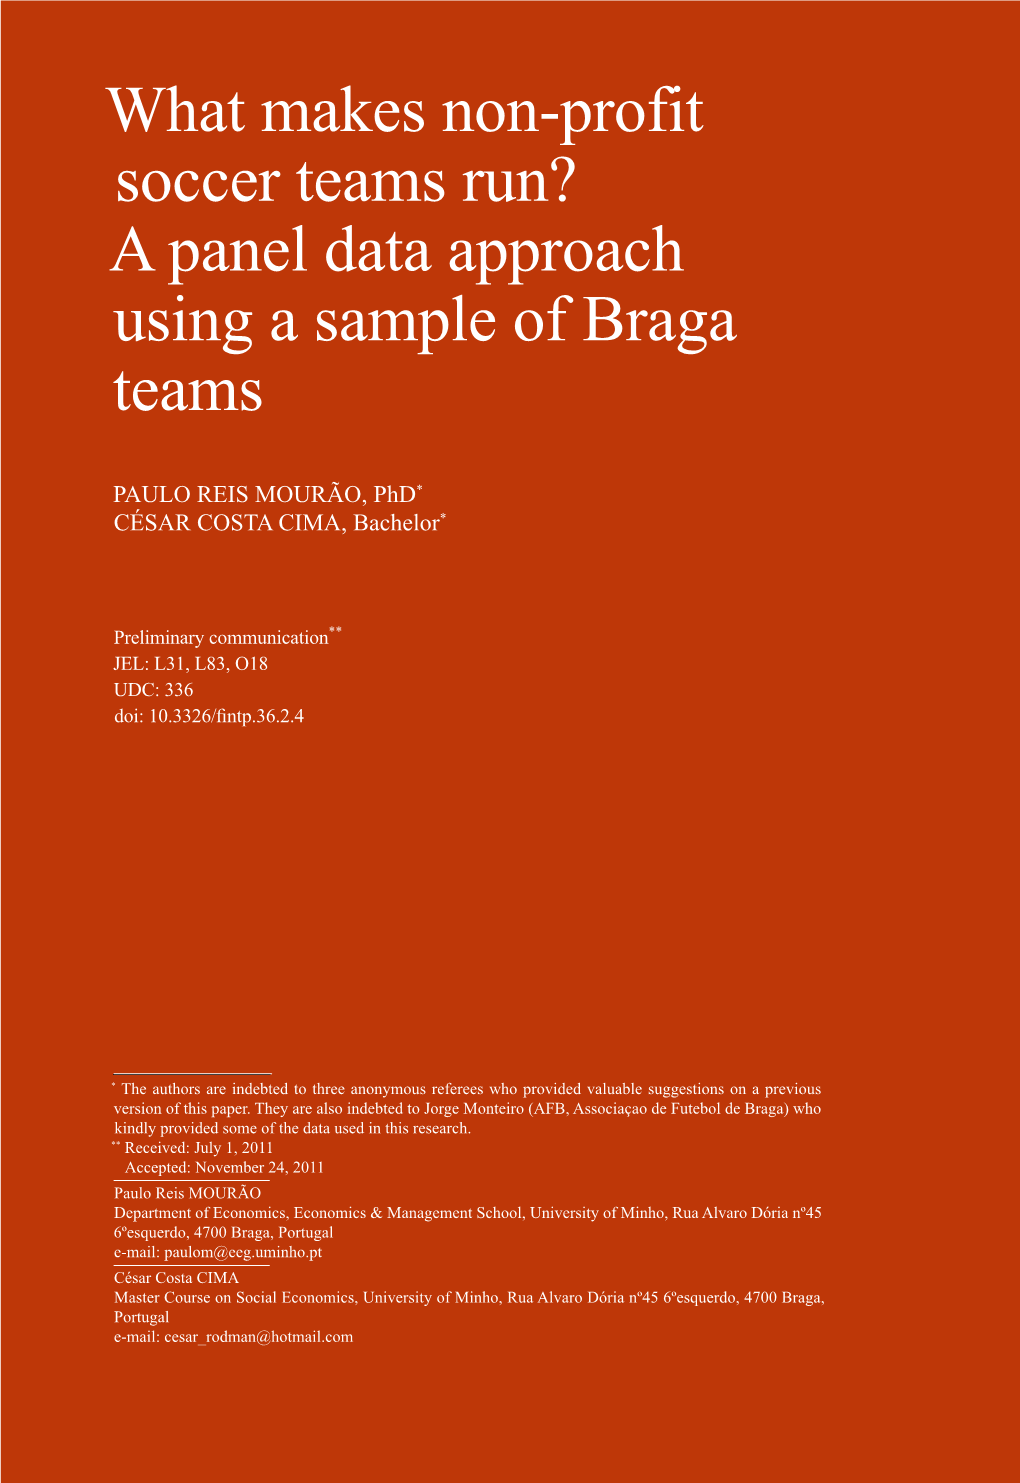 What Makes Non-Profit Soccer Teams Run? a Panel Data Approach Using a Sample Of